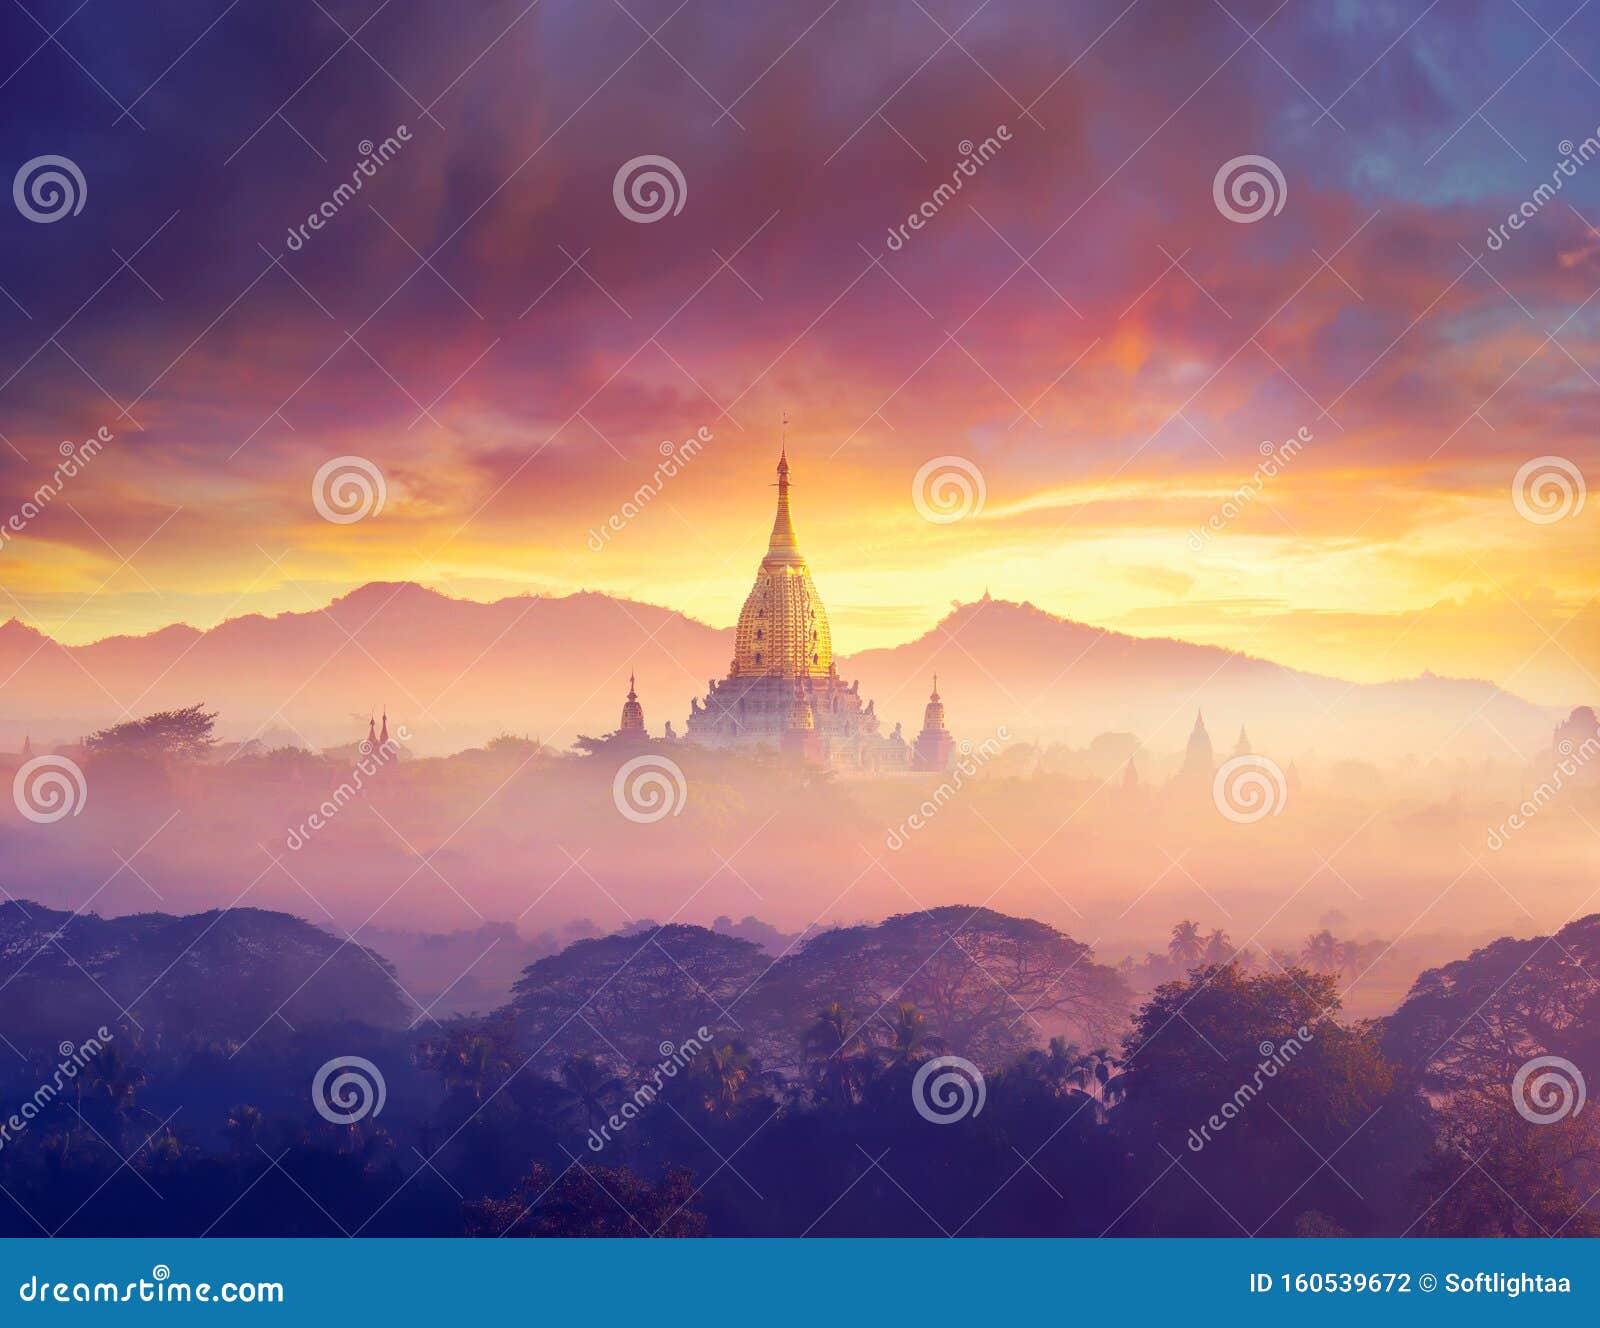 enjoying colorful sunset over of buddhist stupas and hot air balloon in the ancient bagan. myanmar, asia